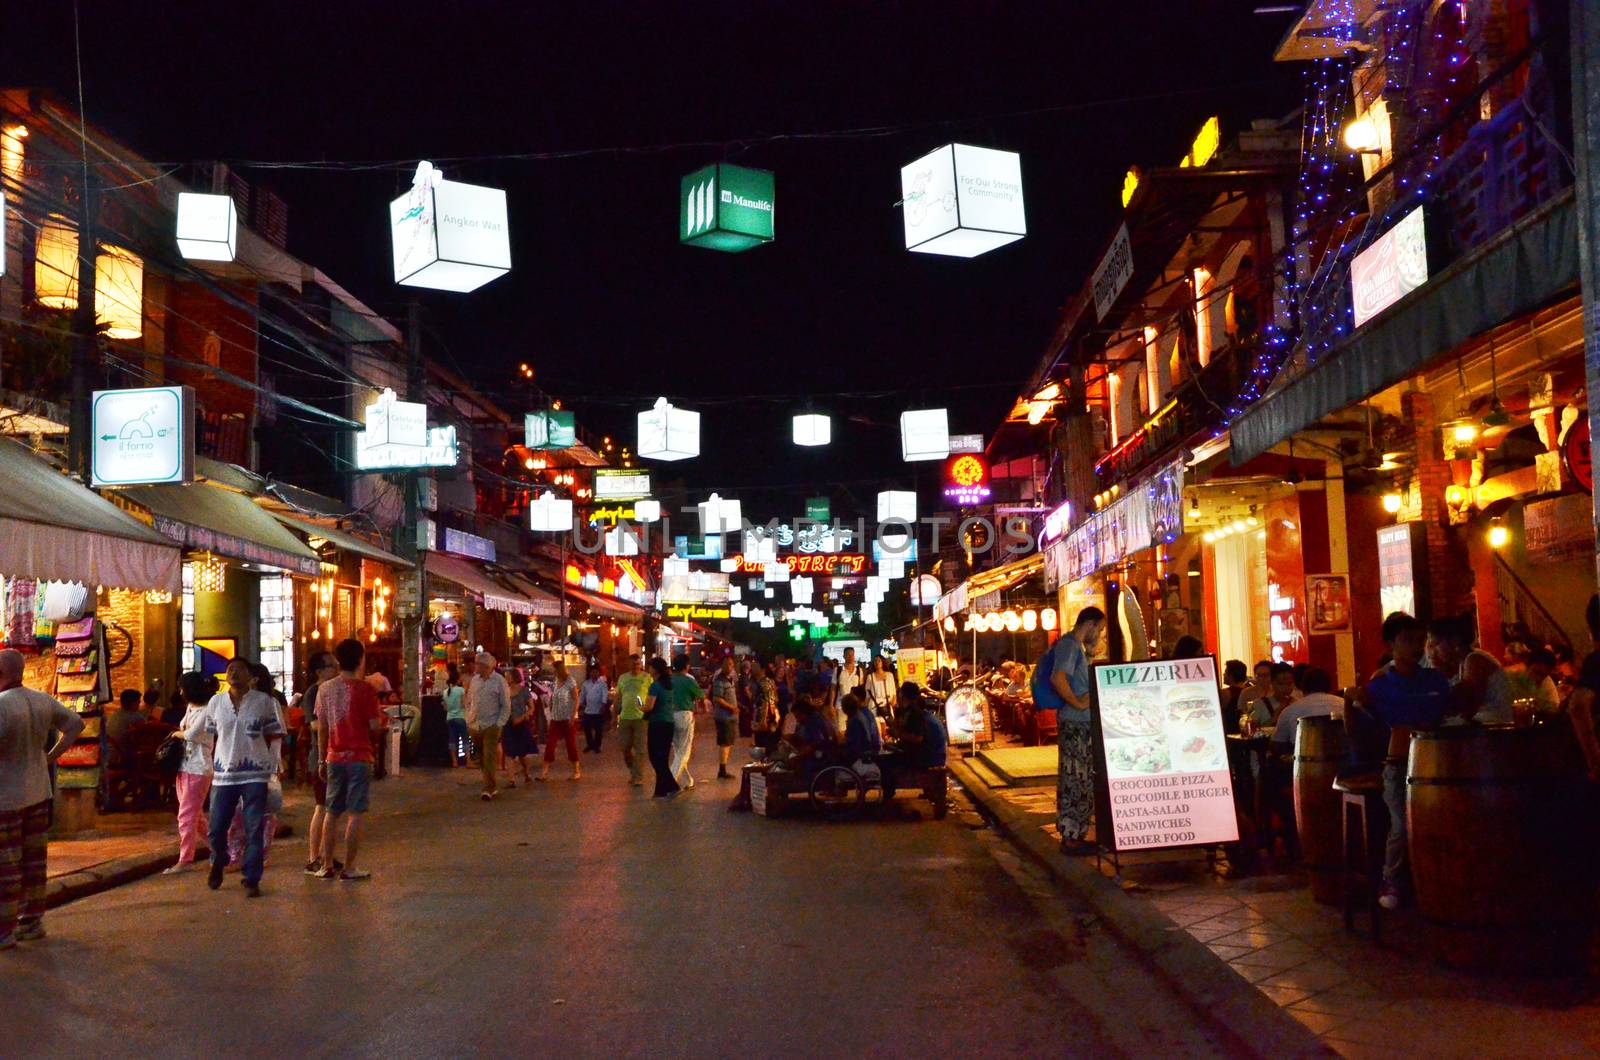 Siem Reap, Cambodia - December 2, 2015: Unidentified tourists shopping at the Pub street in Siem Reap, Cambodia. Pub street is the famous night market of Siem Reap.